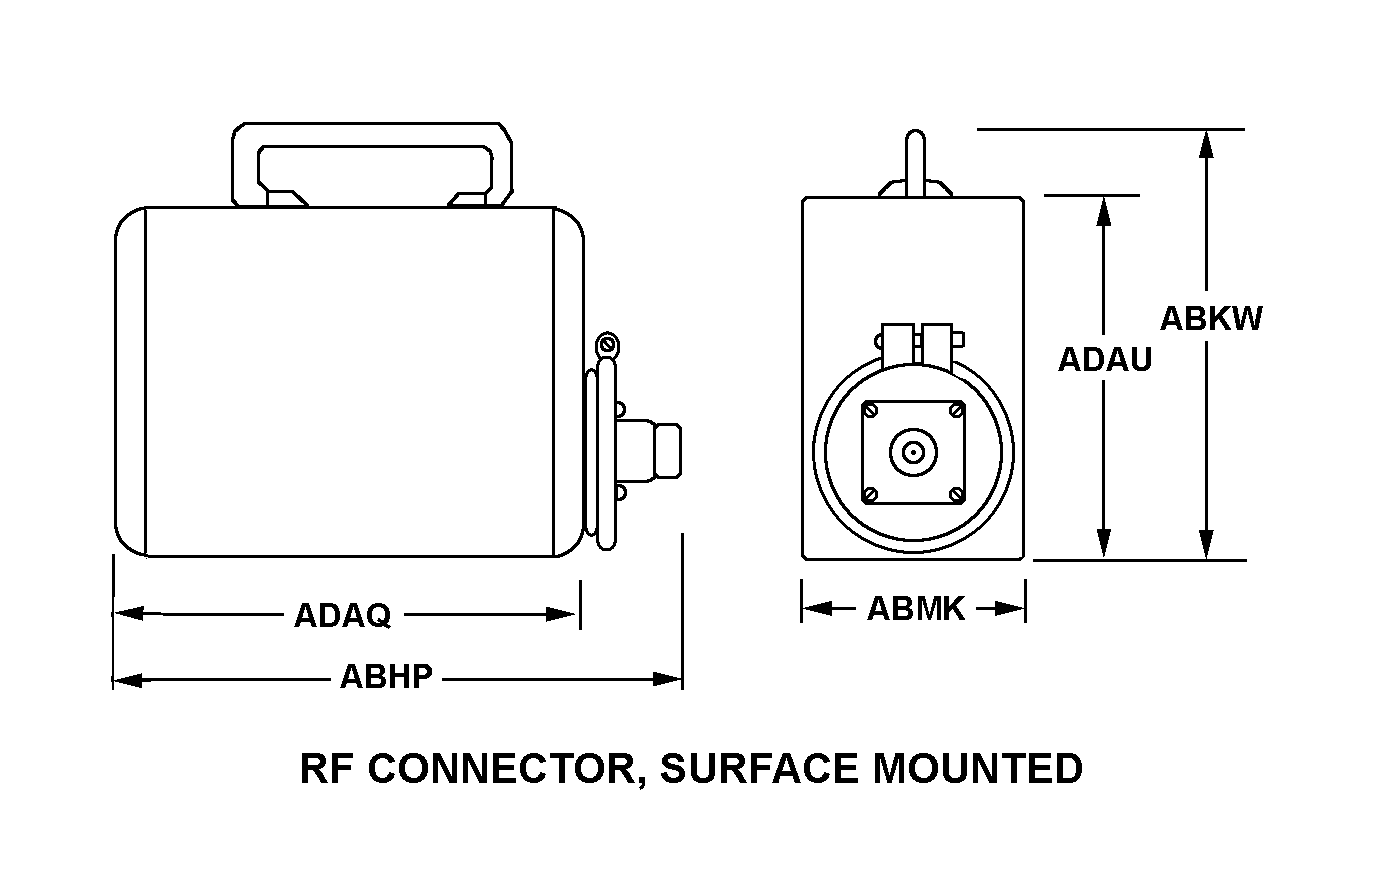 RF CONNECTOR, SURFACE MOUNTED style nsn 5985-01-083-4738